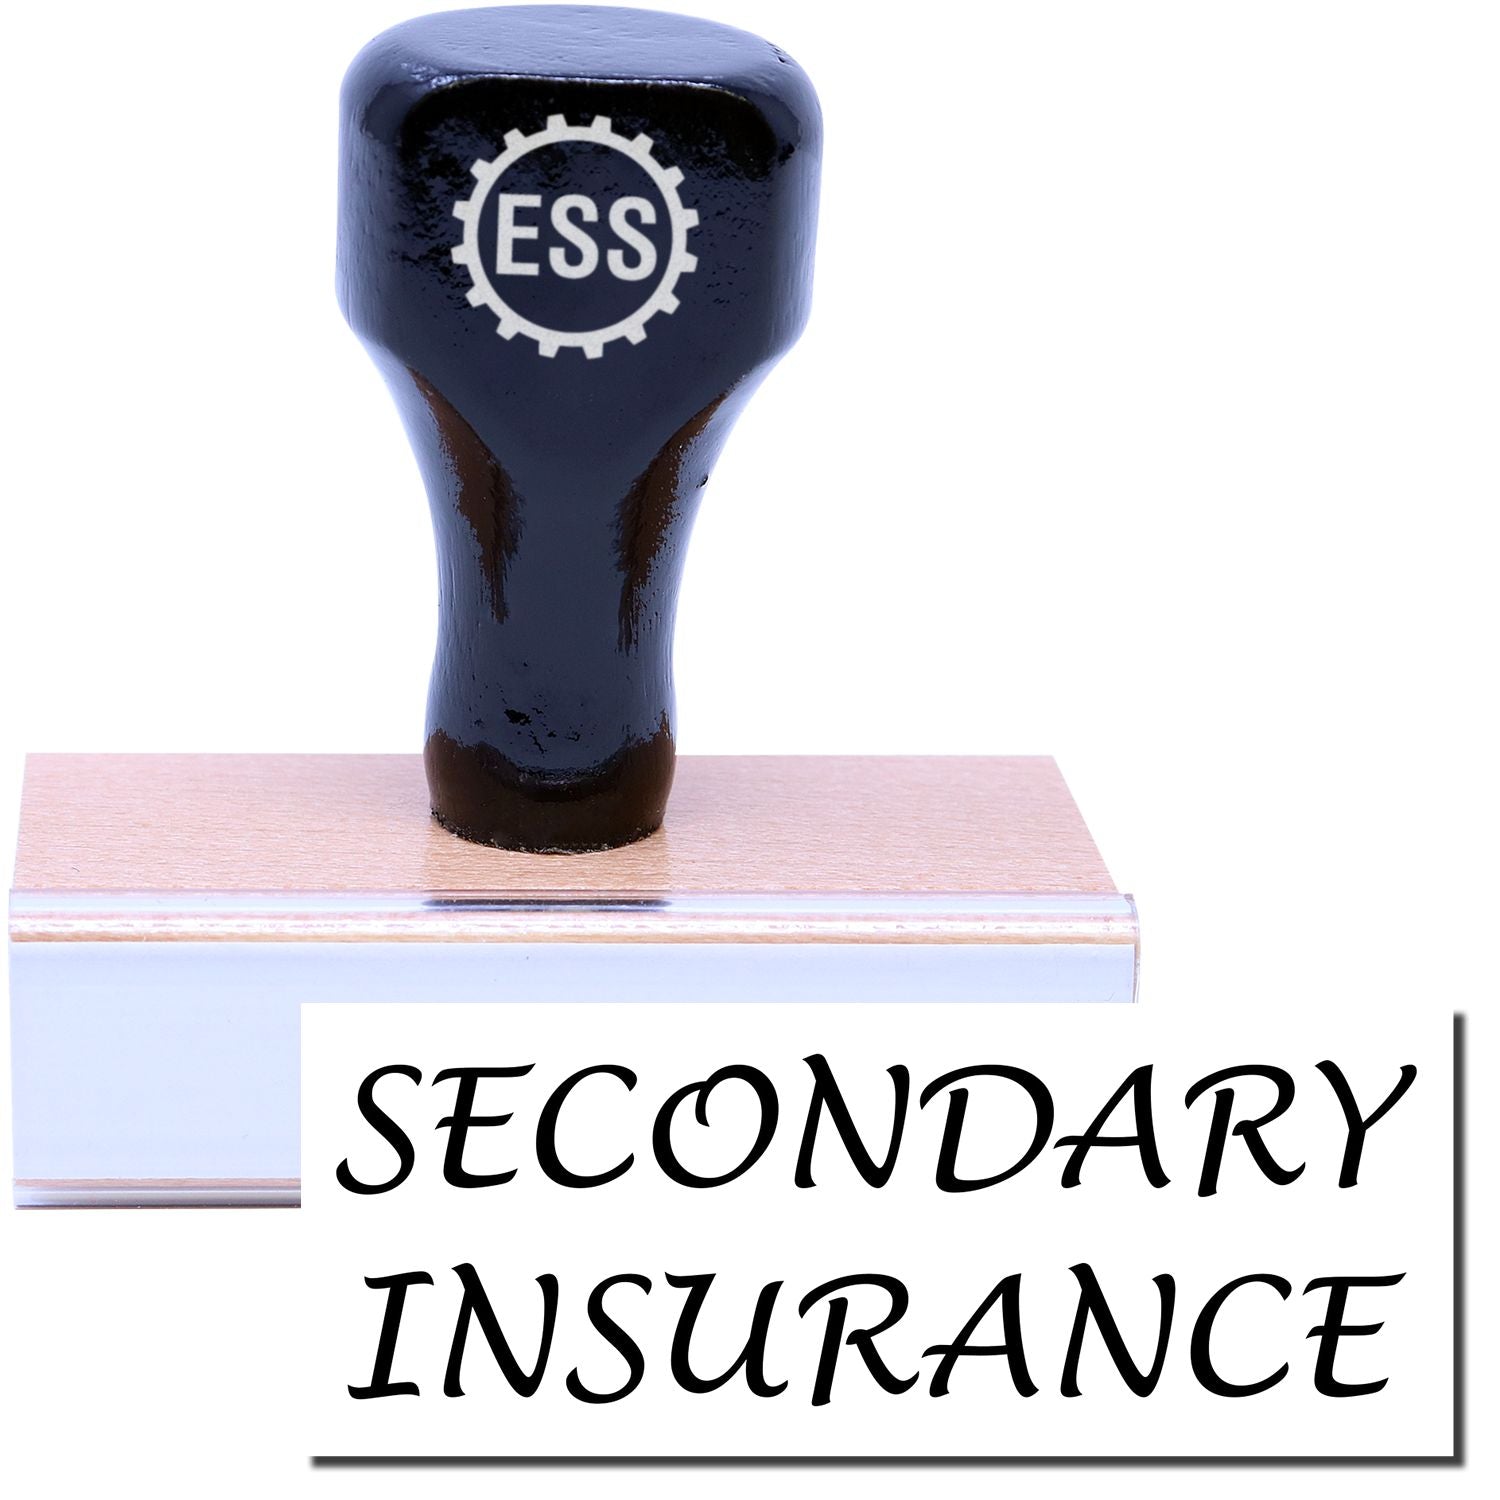 A stock office rubber stamp with a stamped image showing how the text "SECONDARY INSURANCE" in a large font is displayed after stamping.